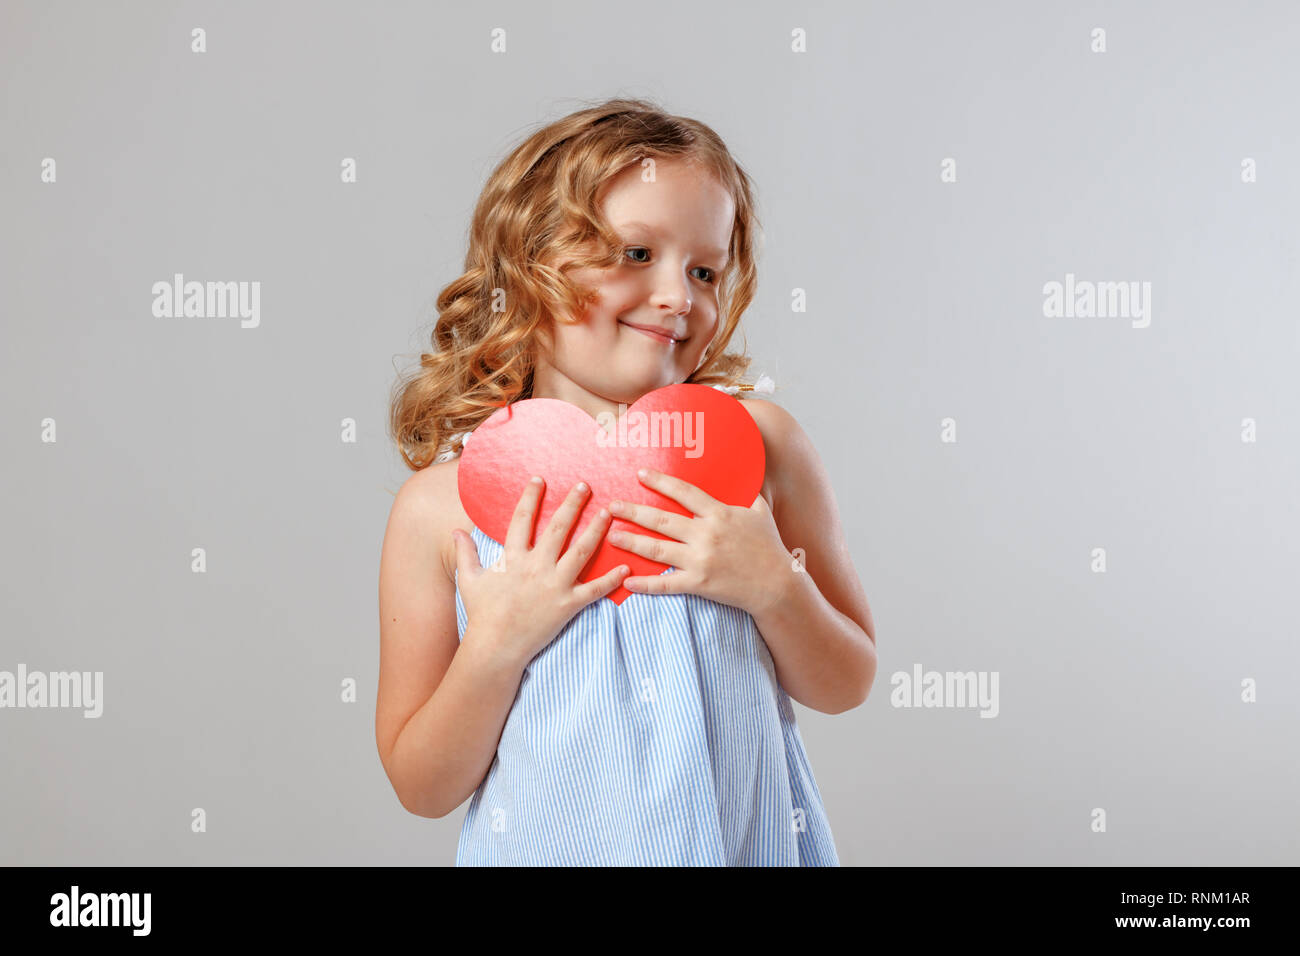 Portrait of an adorable little child girl cuddles a red paper heart. Gray background, studio Stock Photo